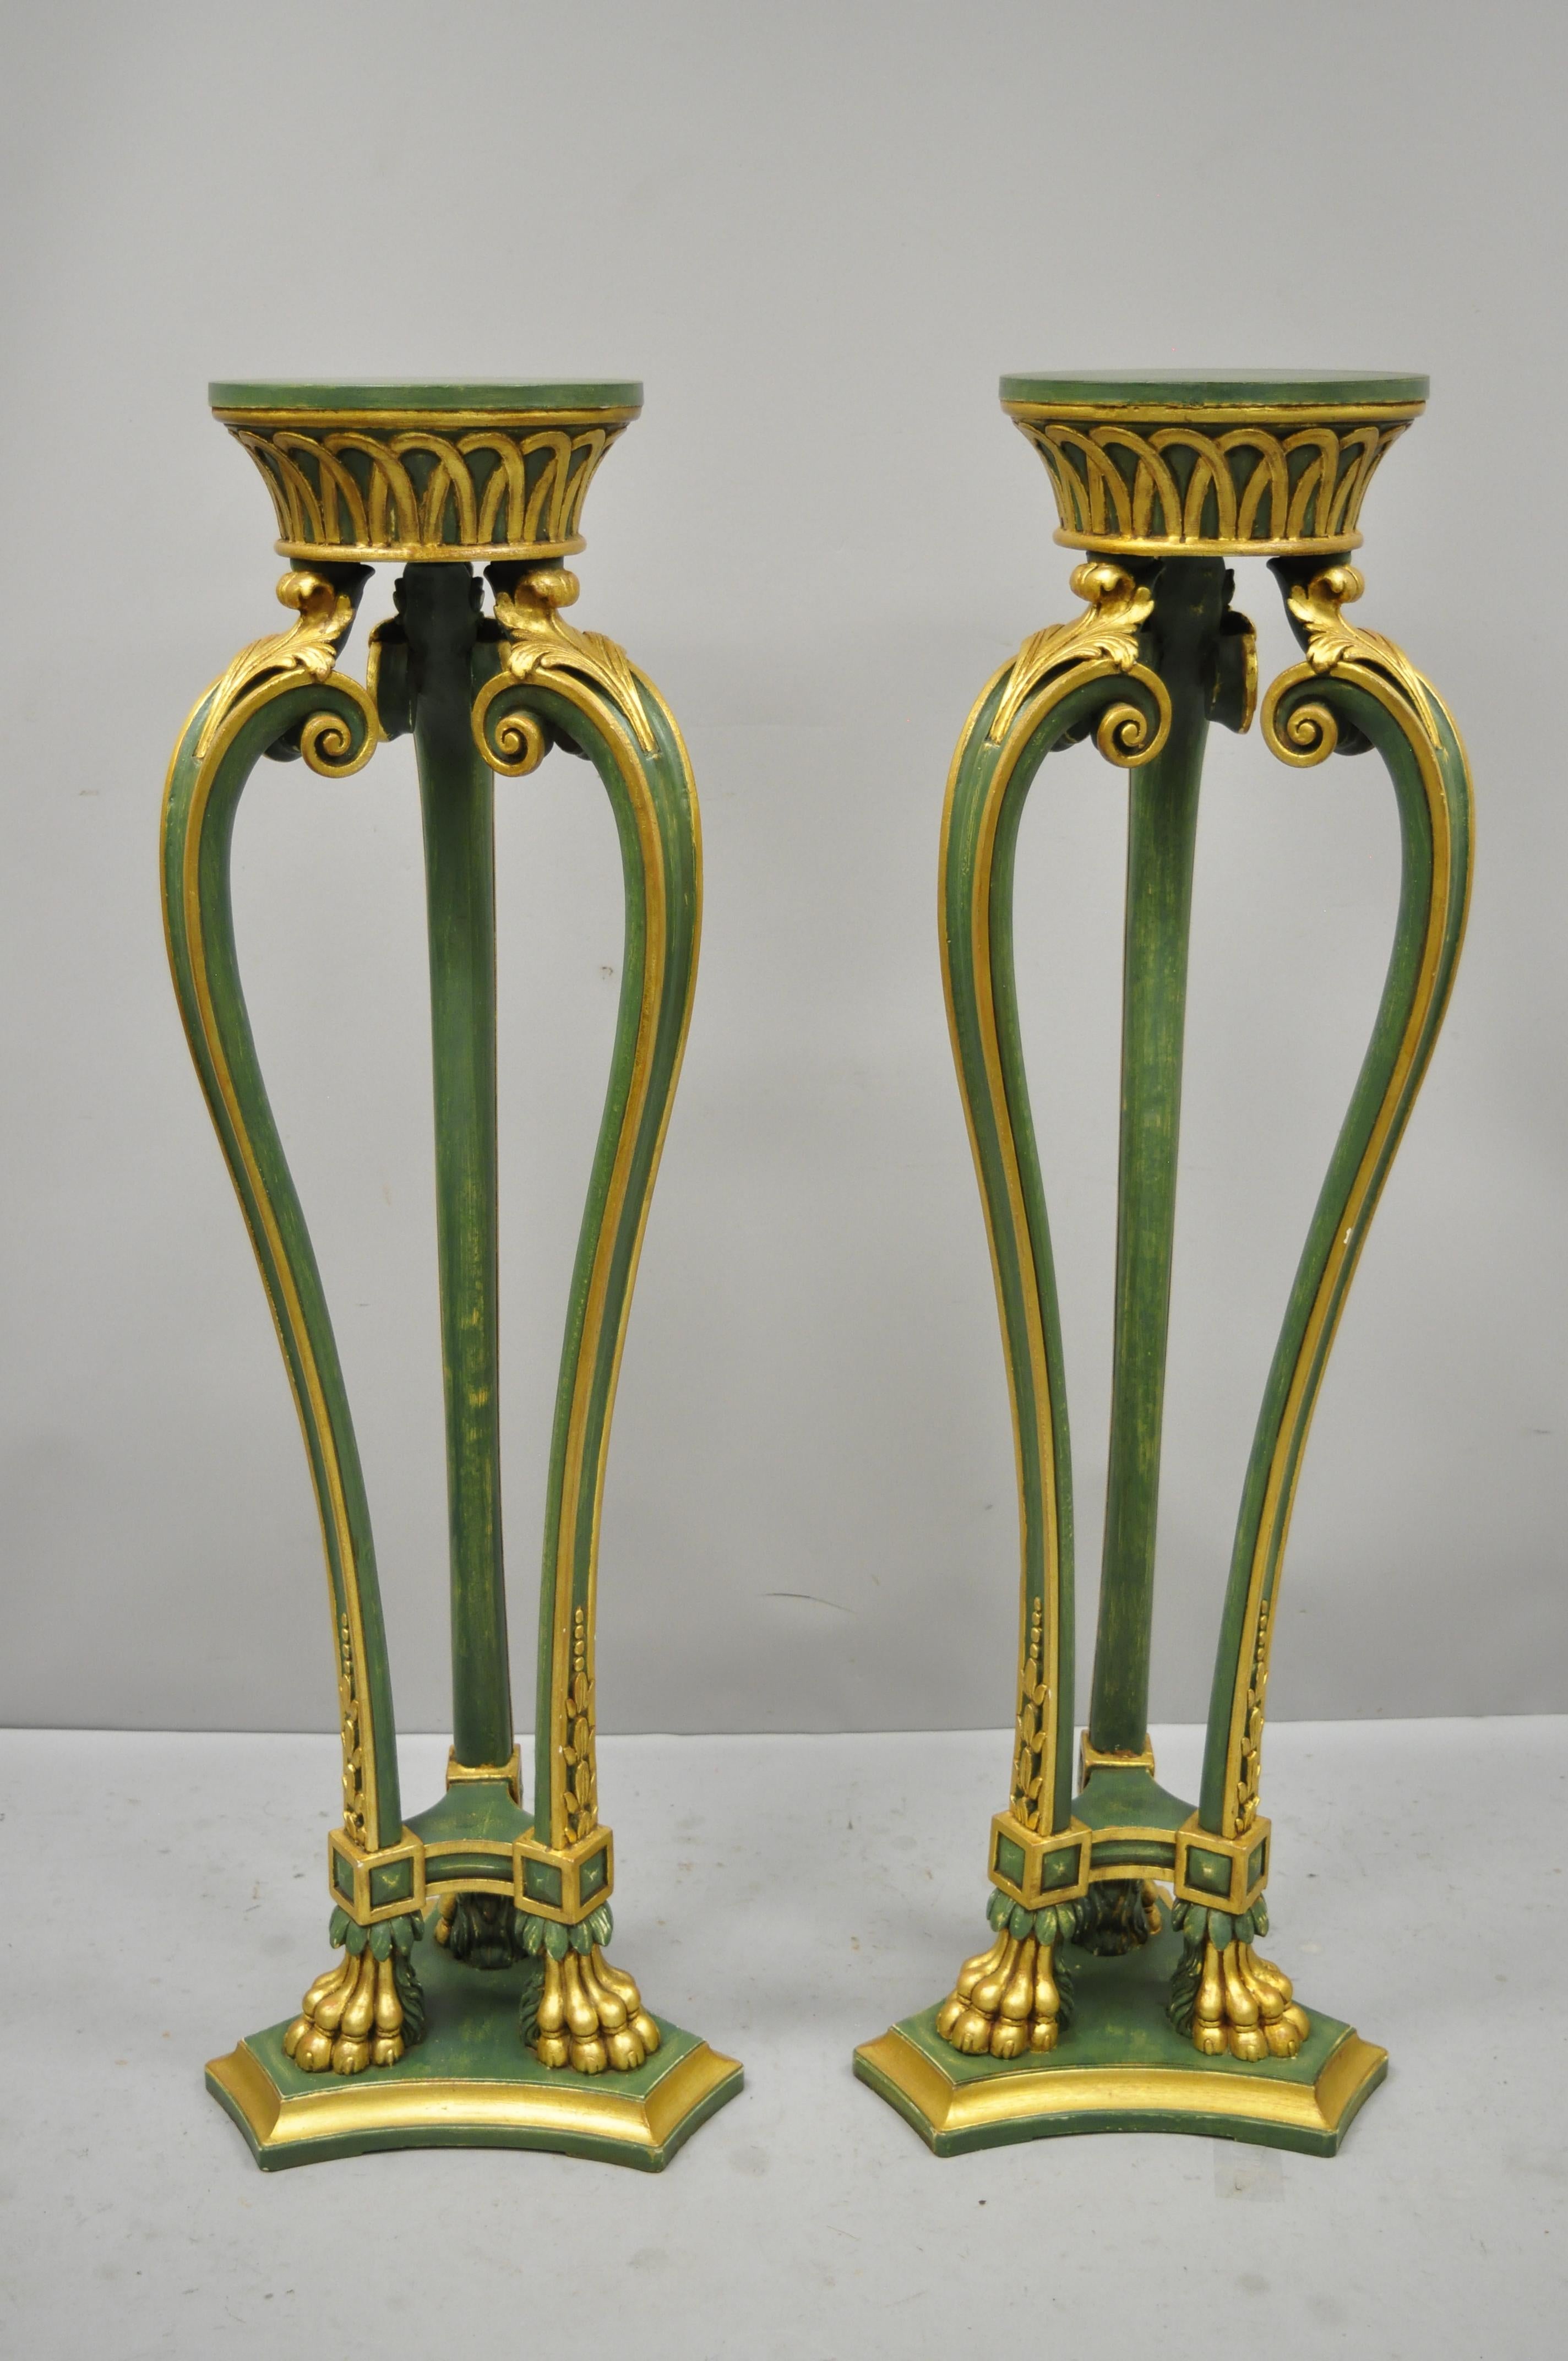 2 Vintage French Regency Neoclassical Style Green & Gold Paw Foot Italian Stands 5